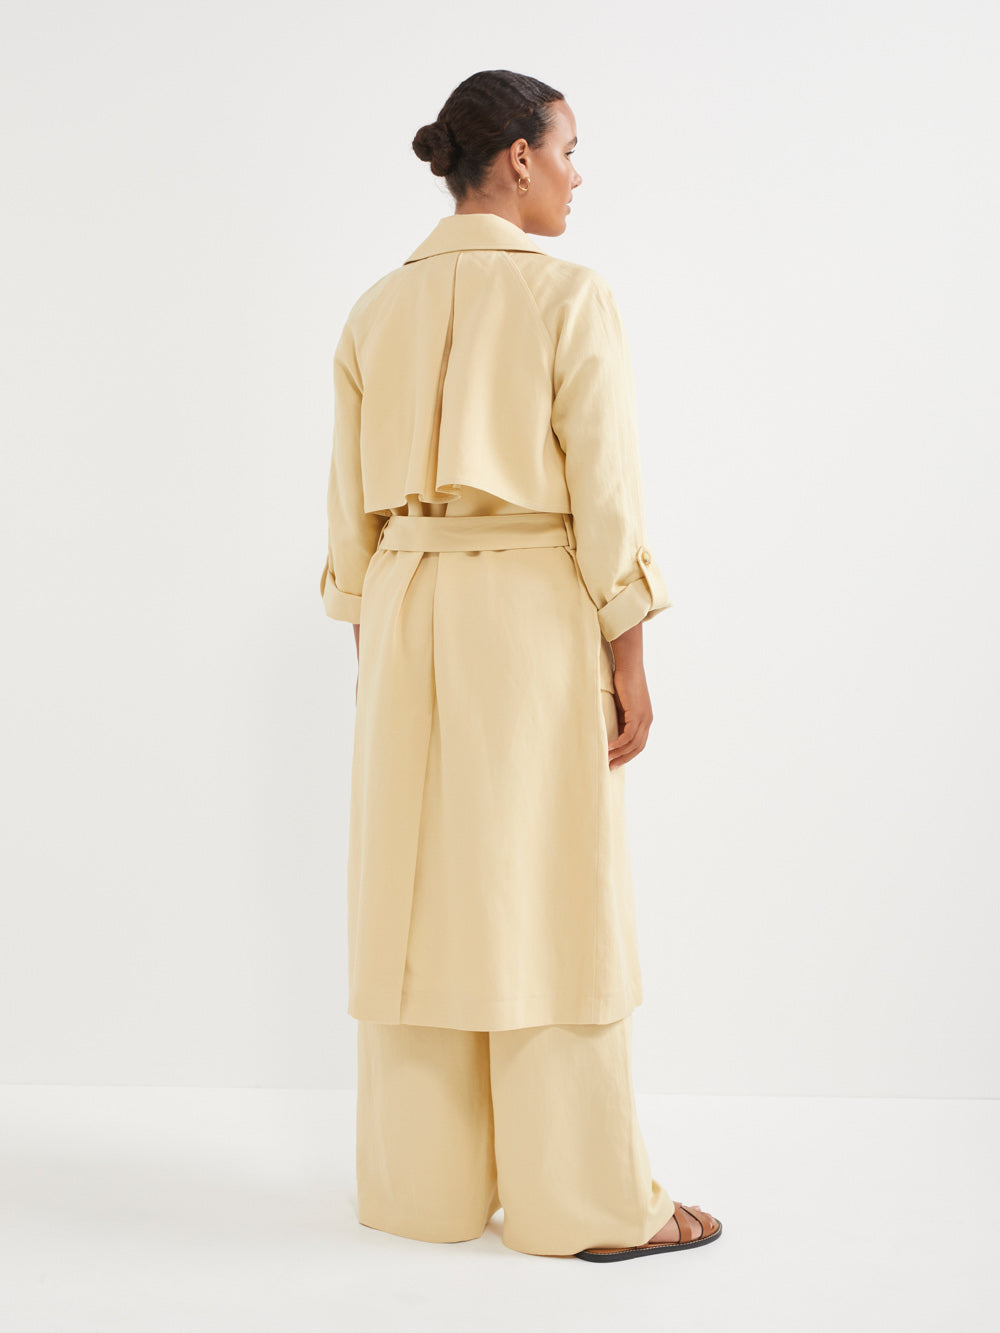 The Linen Blend Statement Trench